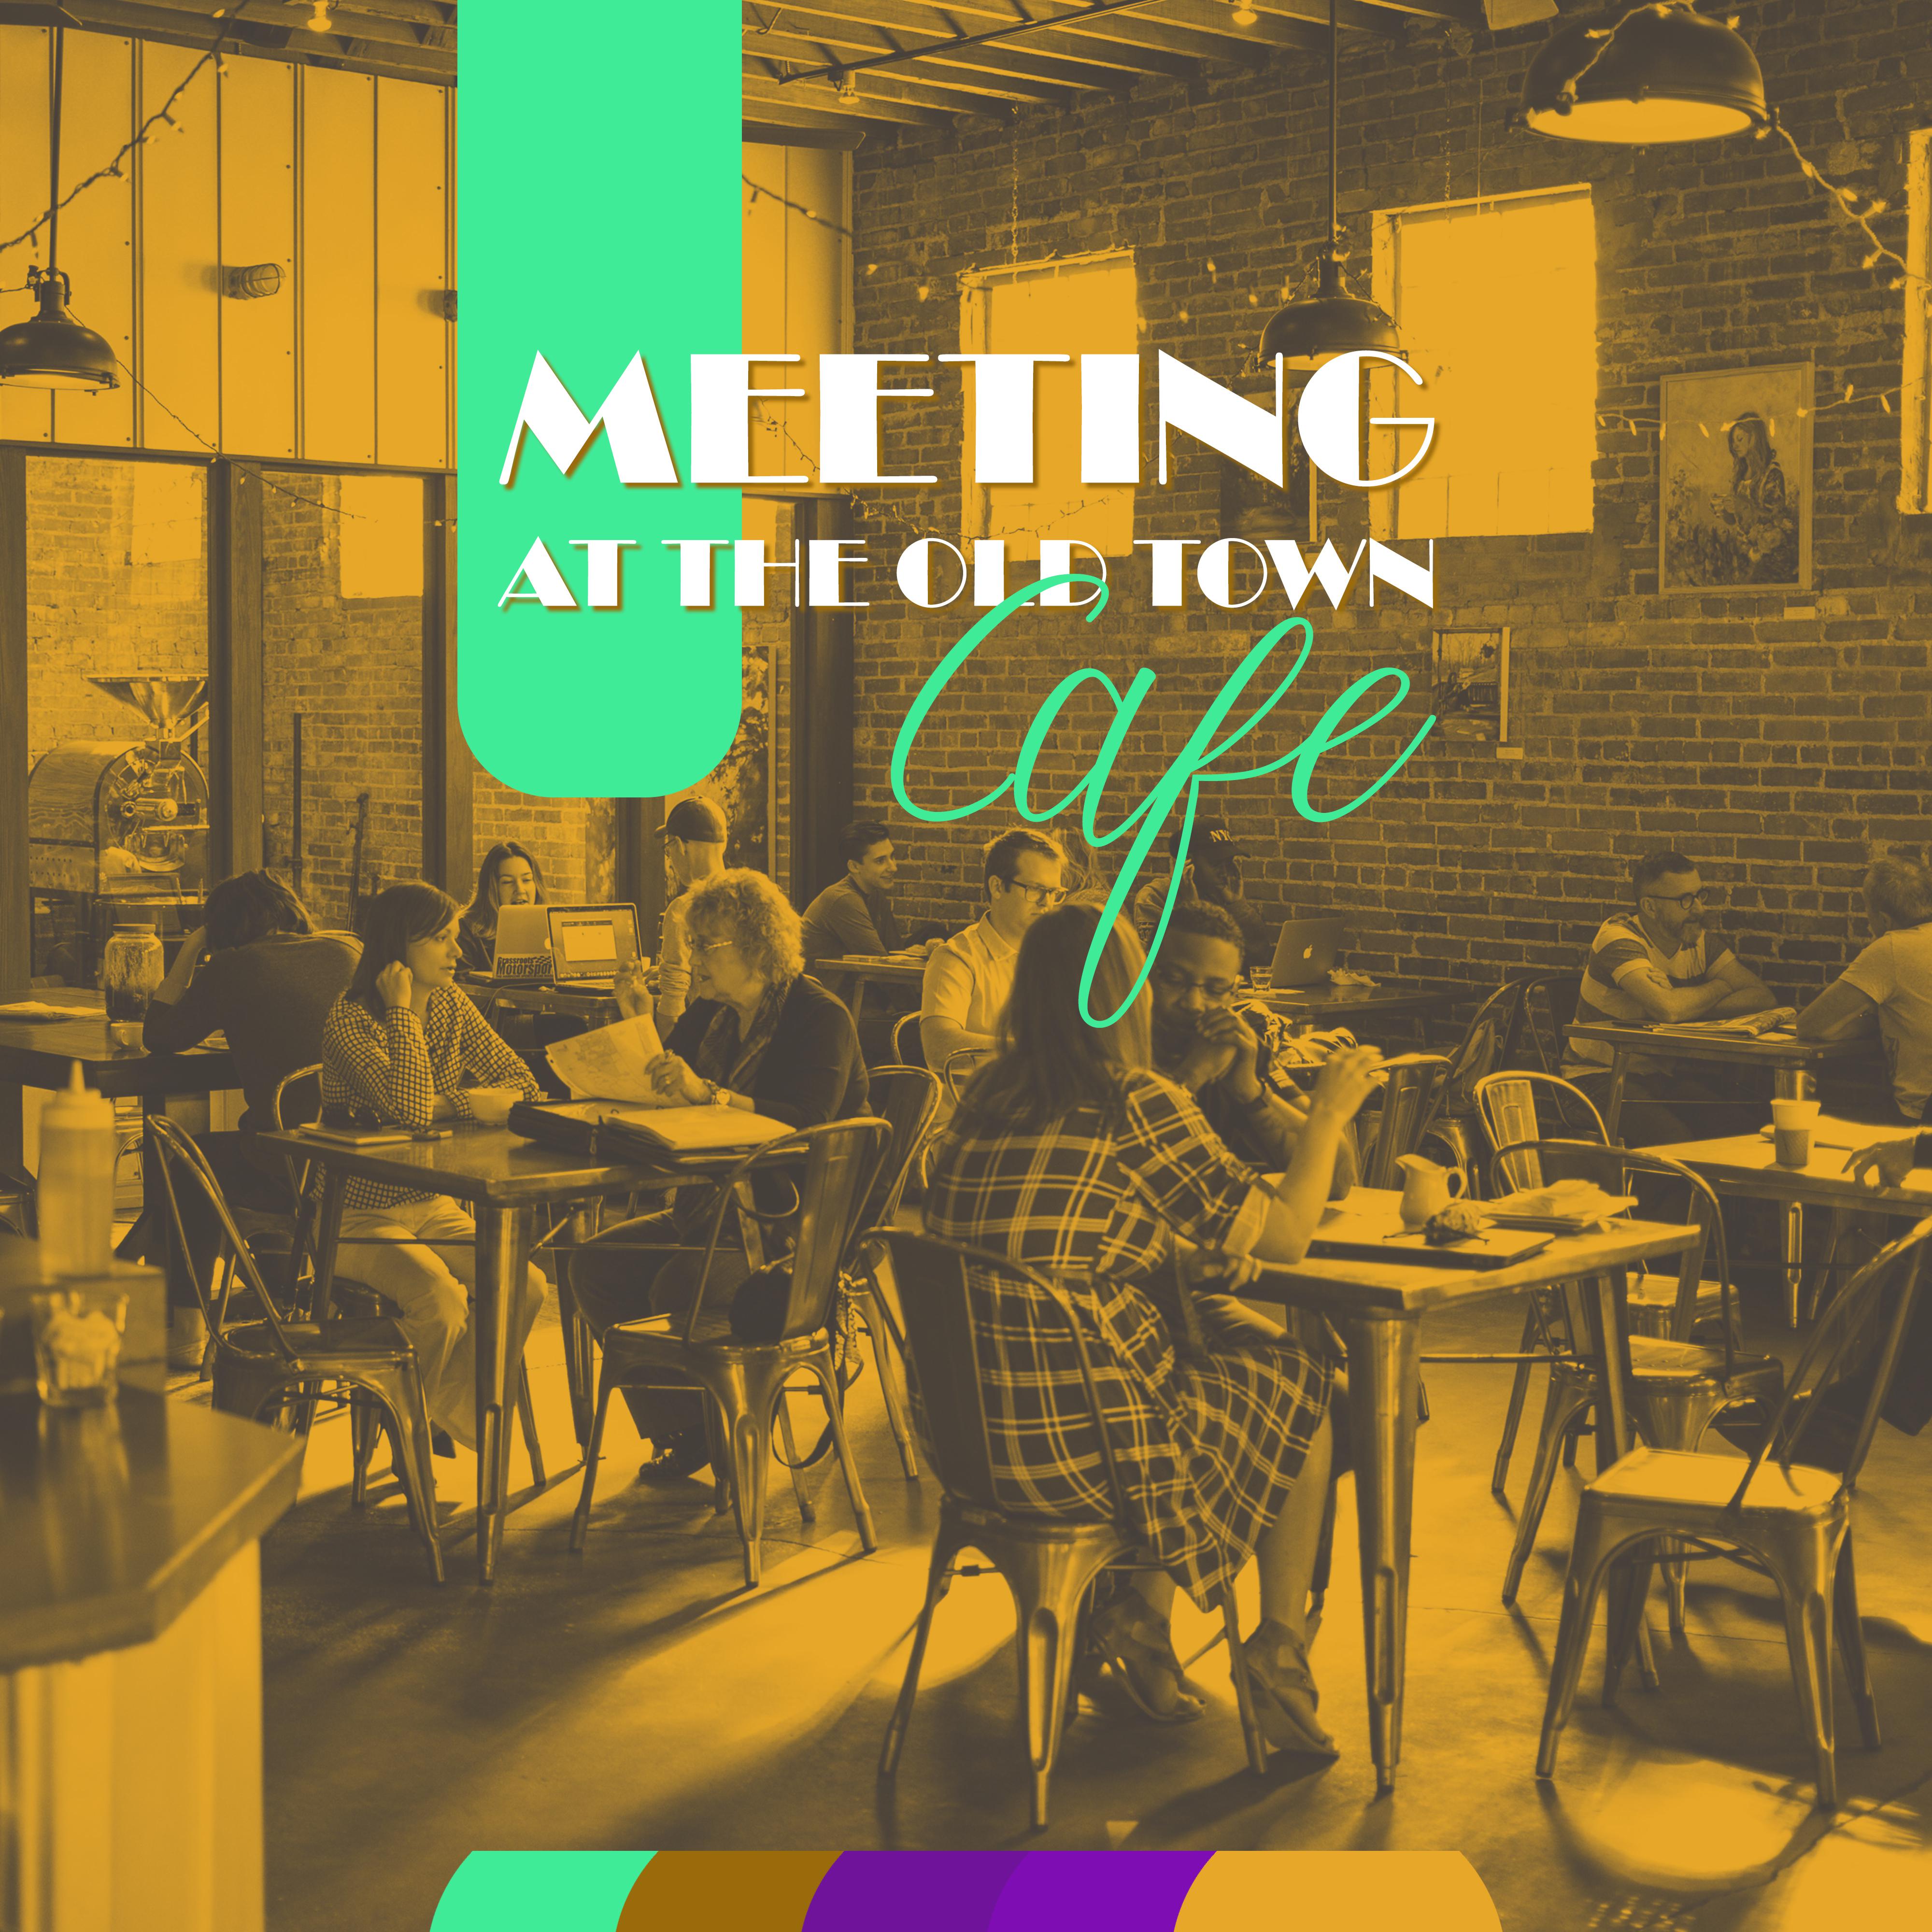 Meeting at the Old Town Cafe: 2019 Smooth Jazz Music for Cafe or Restaurant, Perfect Background for Friend' s Meeting with Coffee  Dessert, Vintage Sounds of Piano, Guitar, Sax  Others